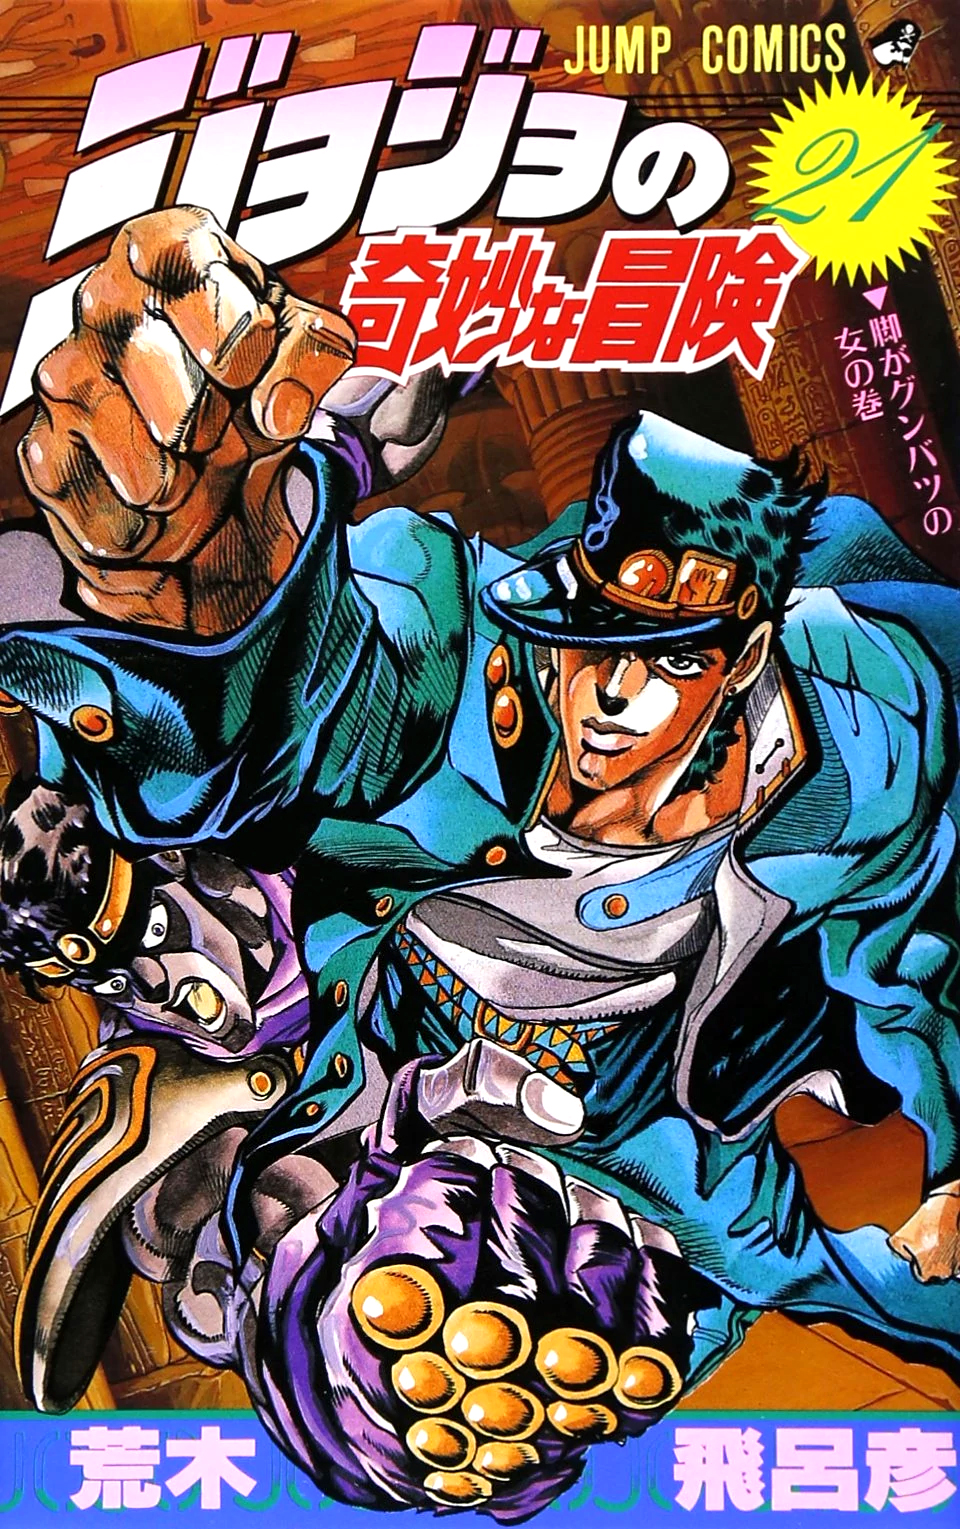 Picture of Jotaro Kujo with his stand STAR PLATINUM